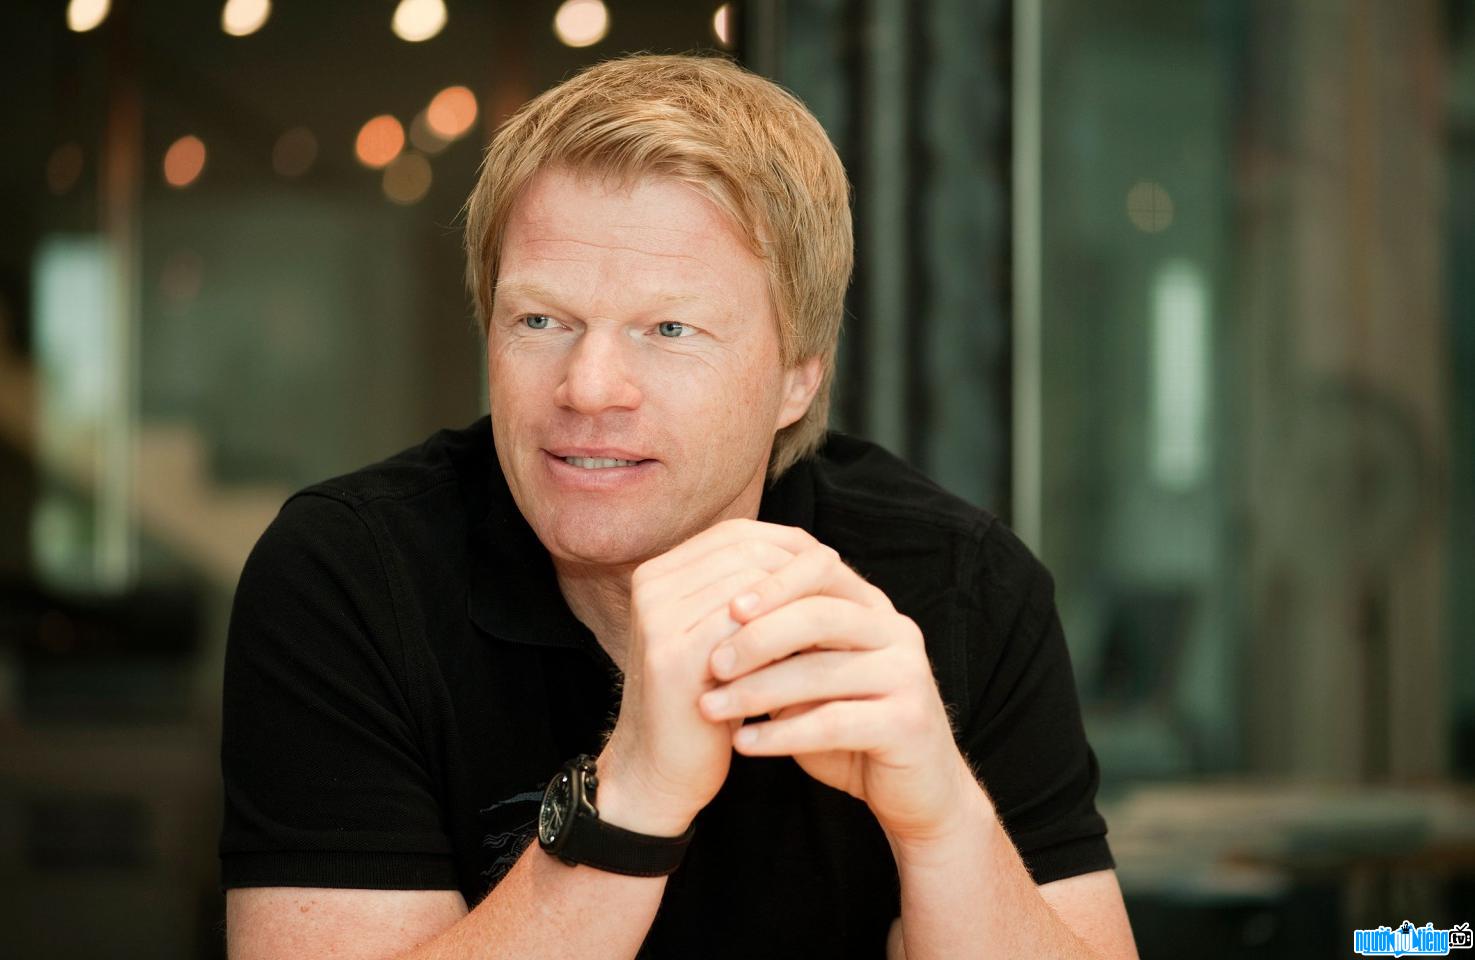 Another picture of former football goalkeeper Oliver Kahn